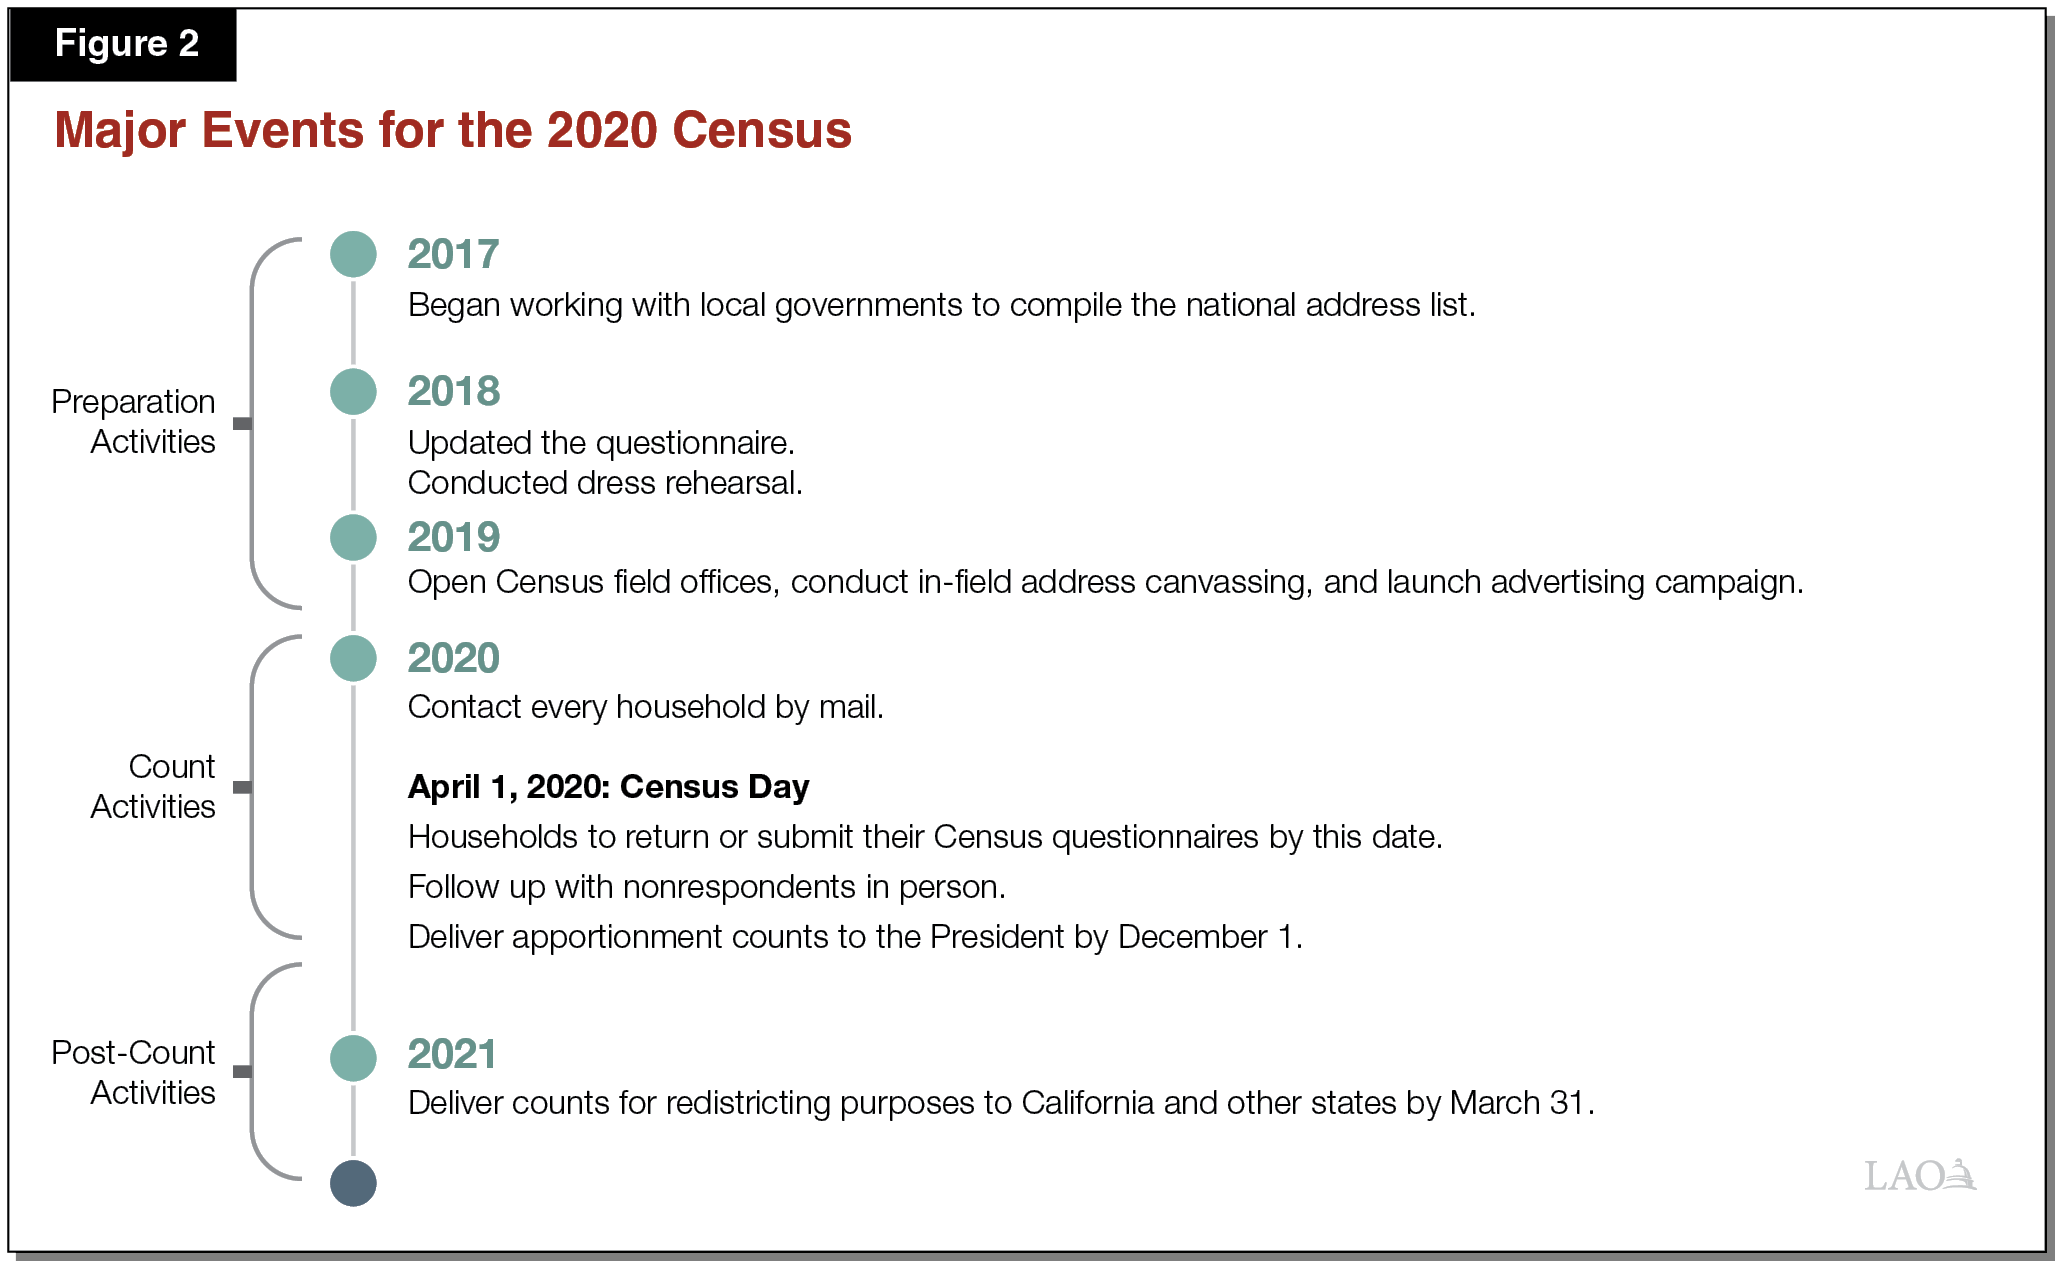 Figure 2 - Major Events for the 2020 Census